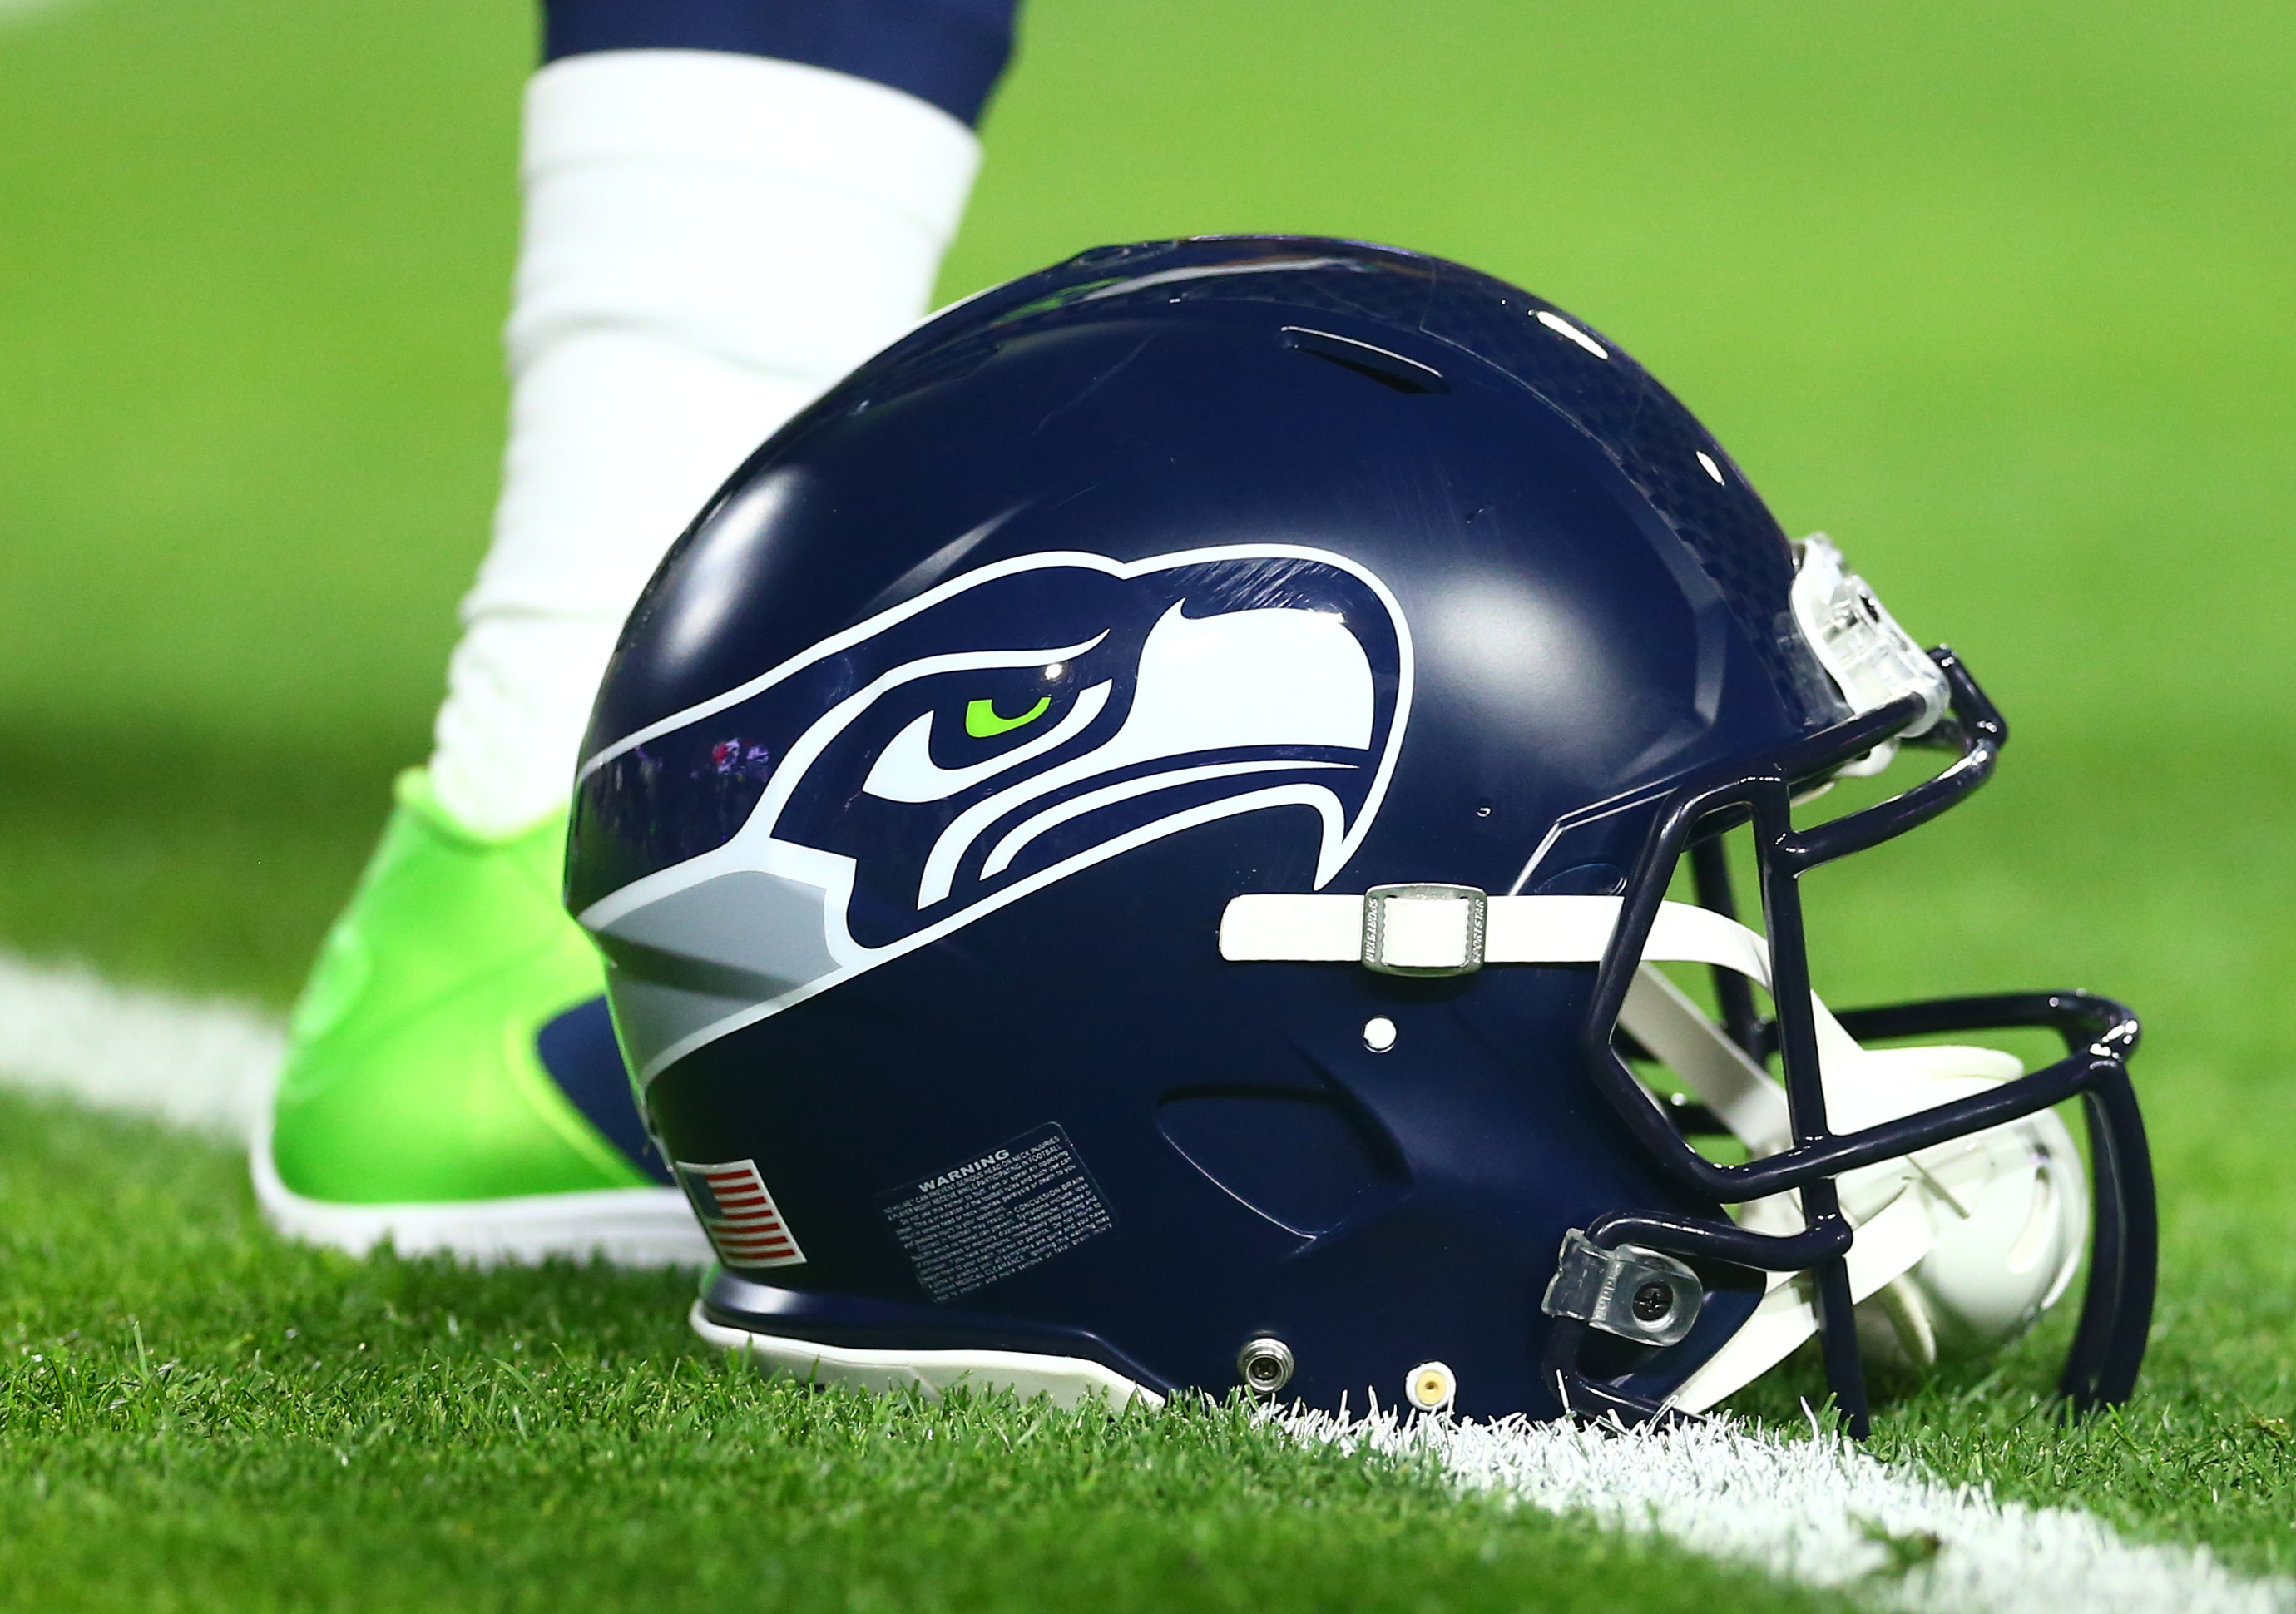 Seahawks Franchise Expected To Be Sold Following Paul Allen's Death